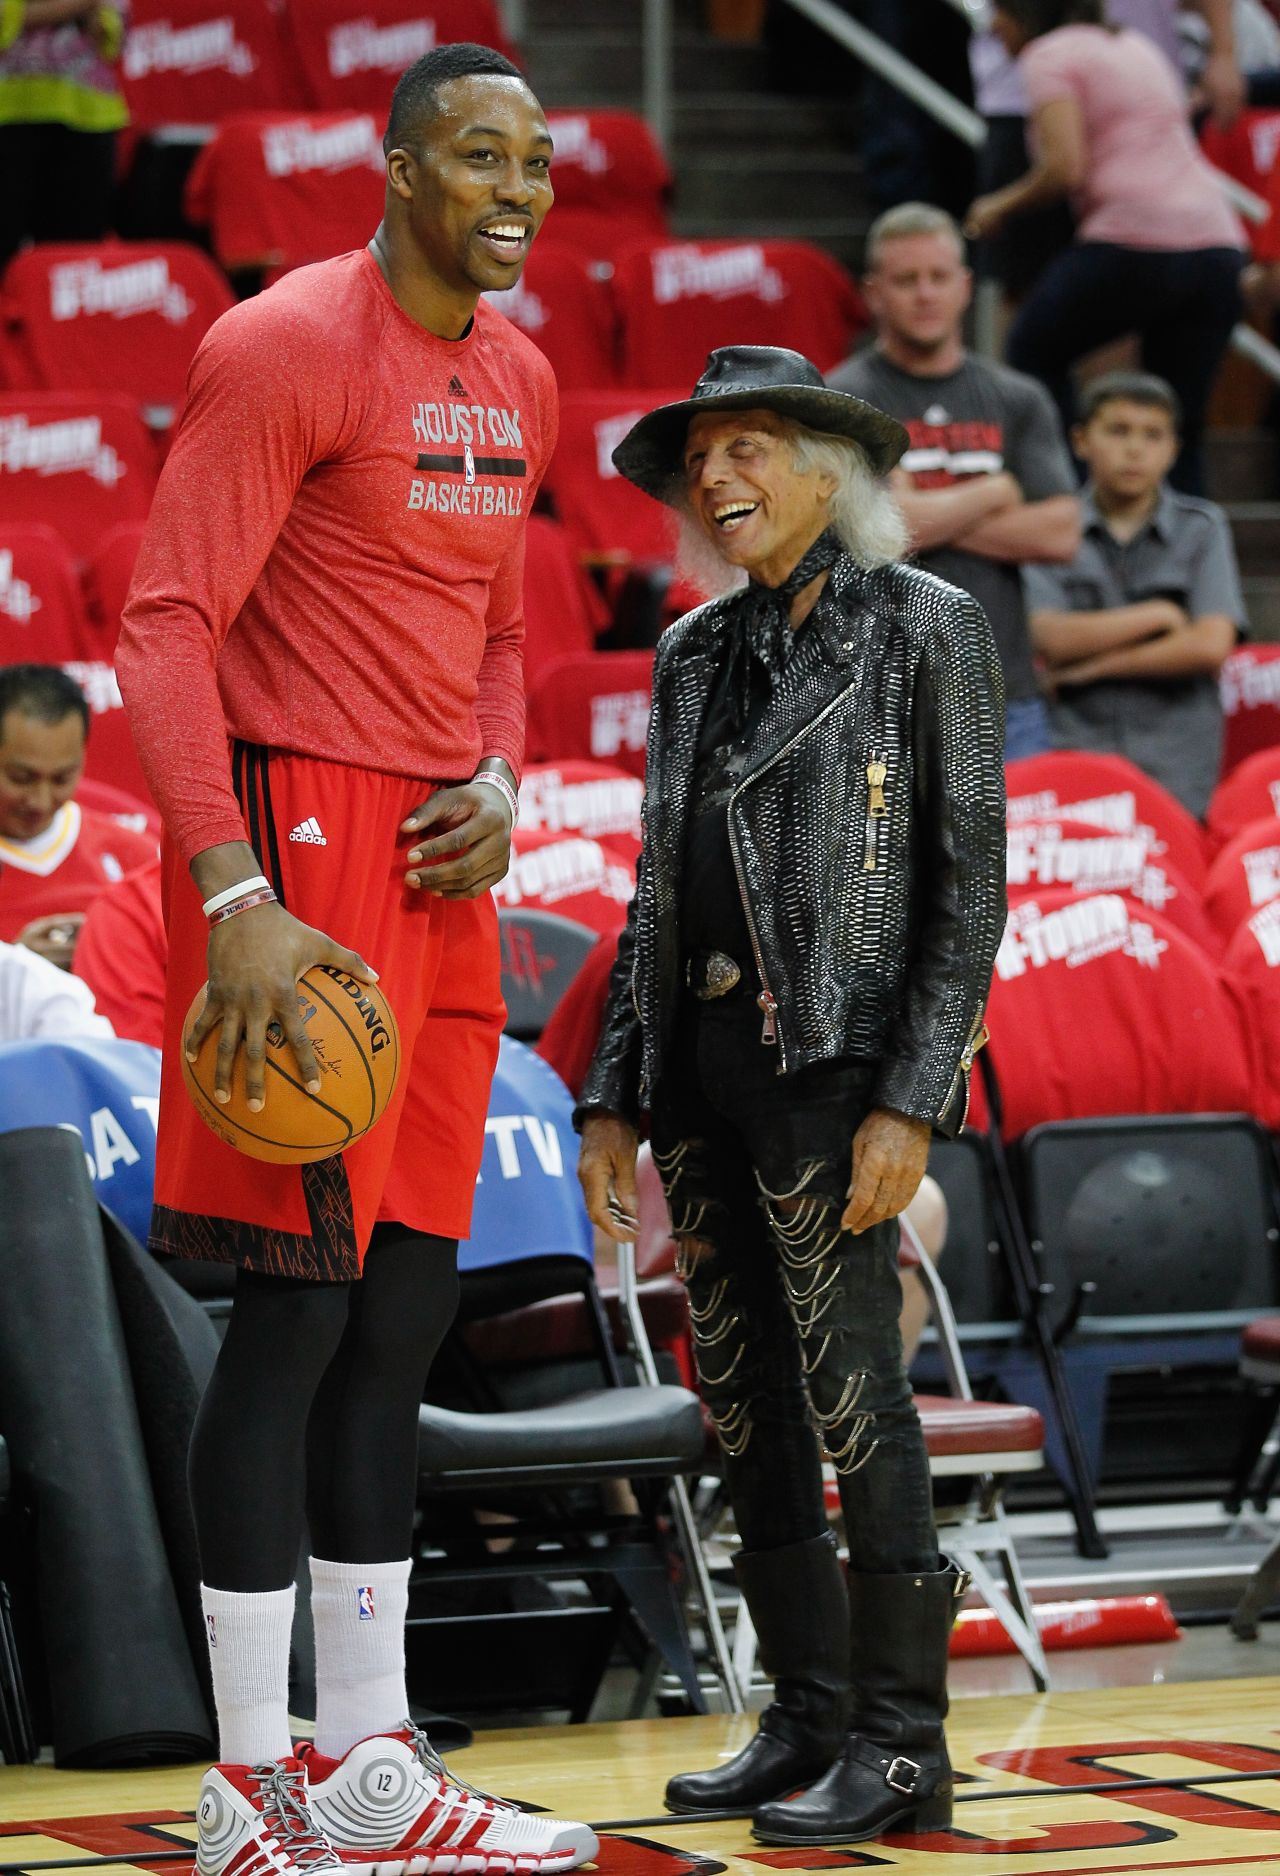 Known as "Jimmy" to his friends, Goldstein likes to arrive at NBA games 45 minutes before tipoff to socialize with players, many of whom he calls friends. He is pictured here with Dwight Howard of the Houston Rockets before a 2014 Western Conference playoff game in Houston, Texas.